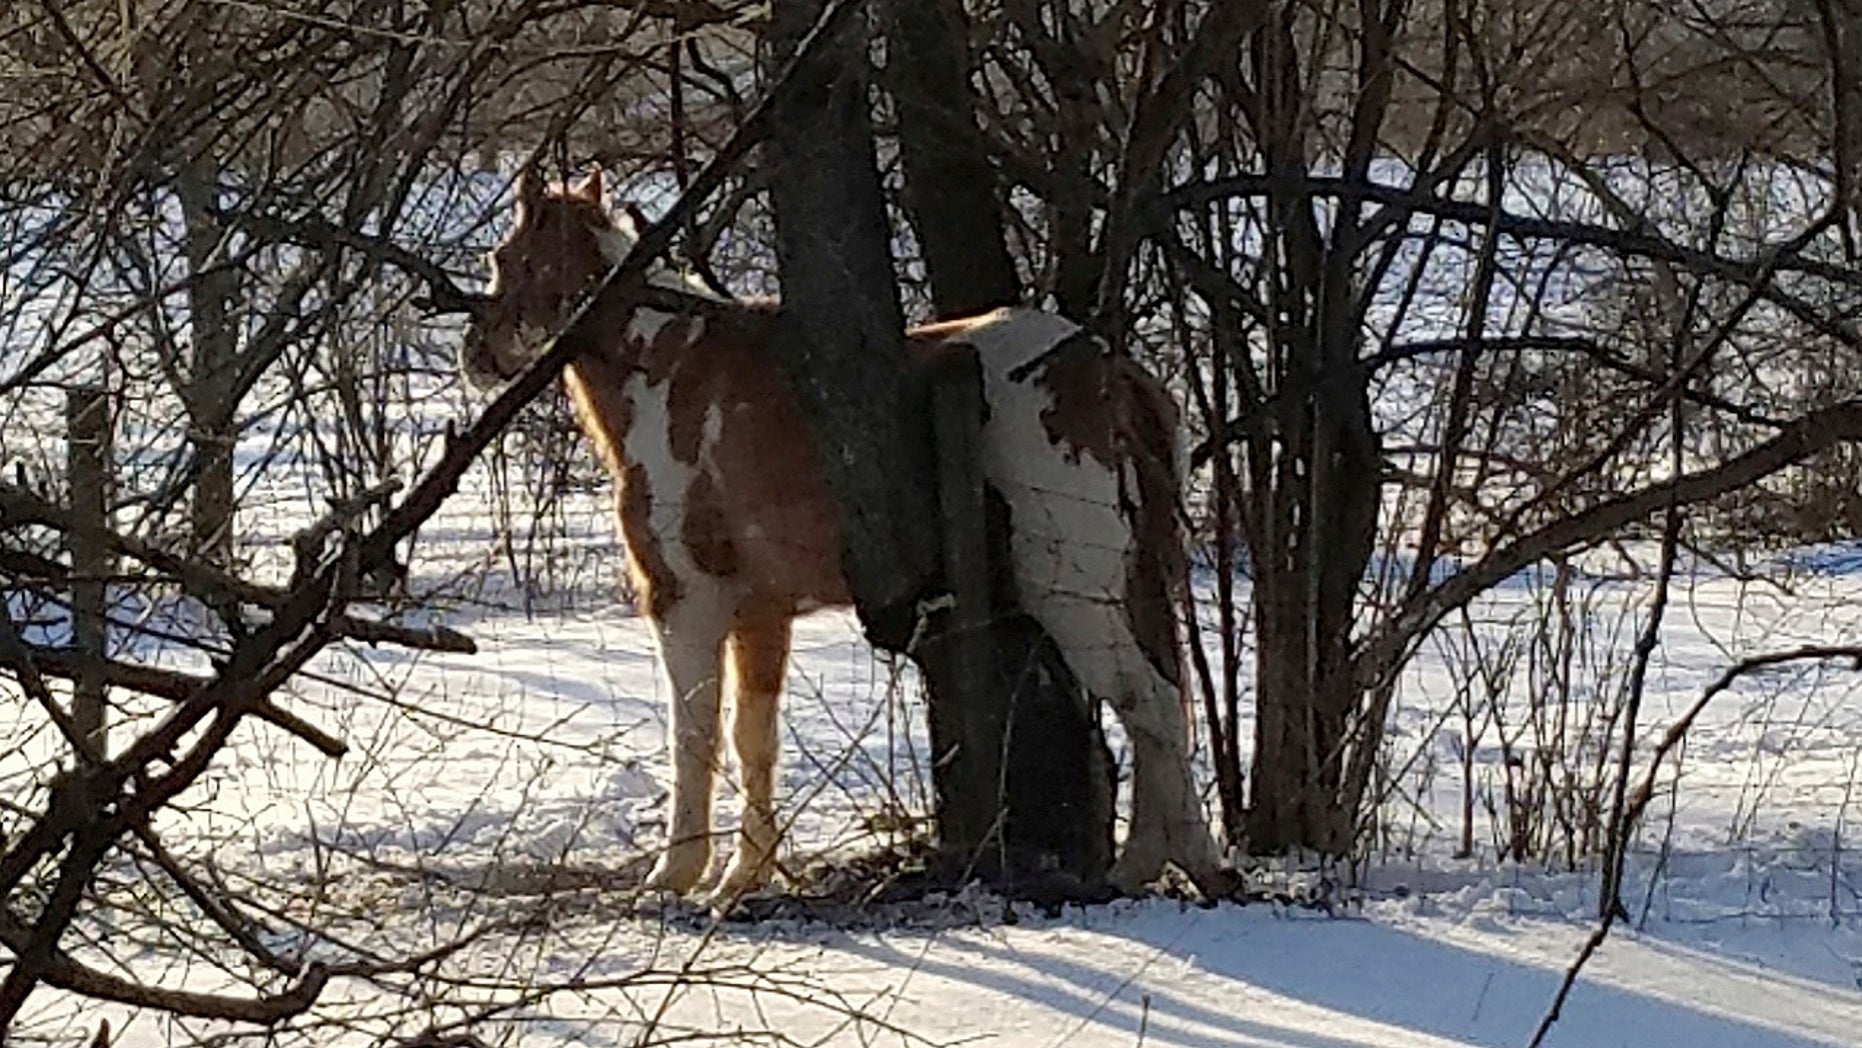 Indiana chainsaw rescue: Town marshal frees horse wedged between tree branches